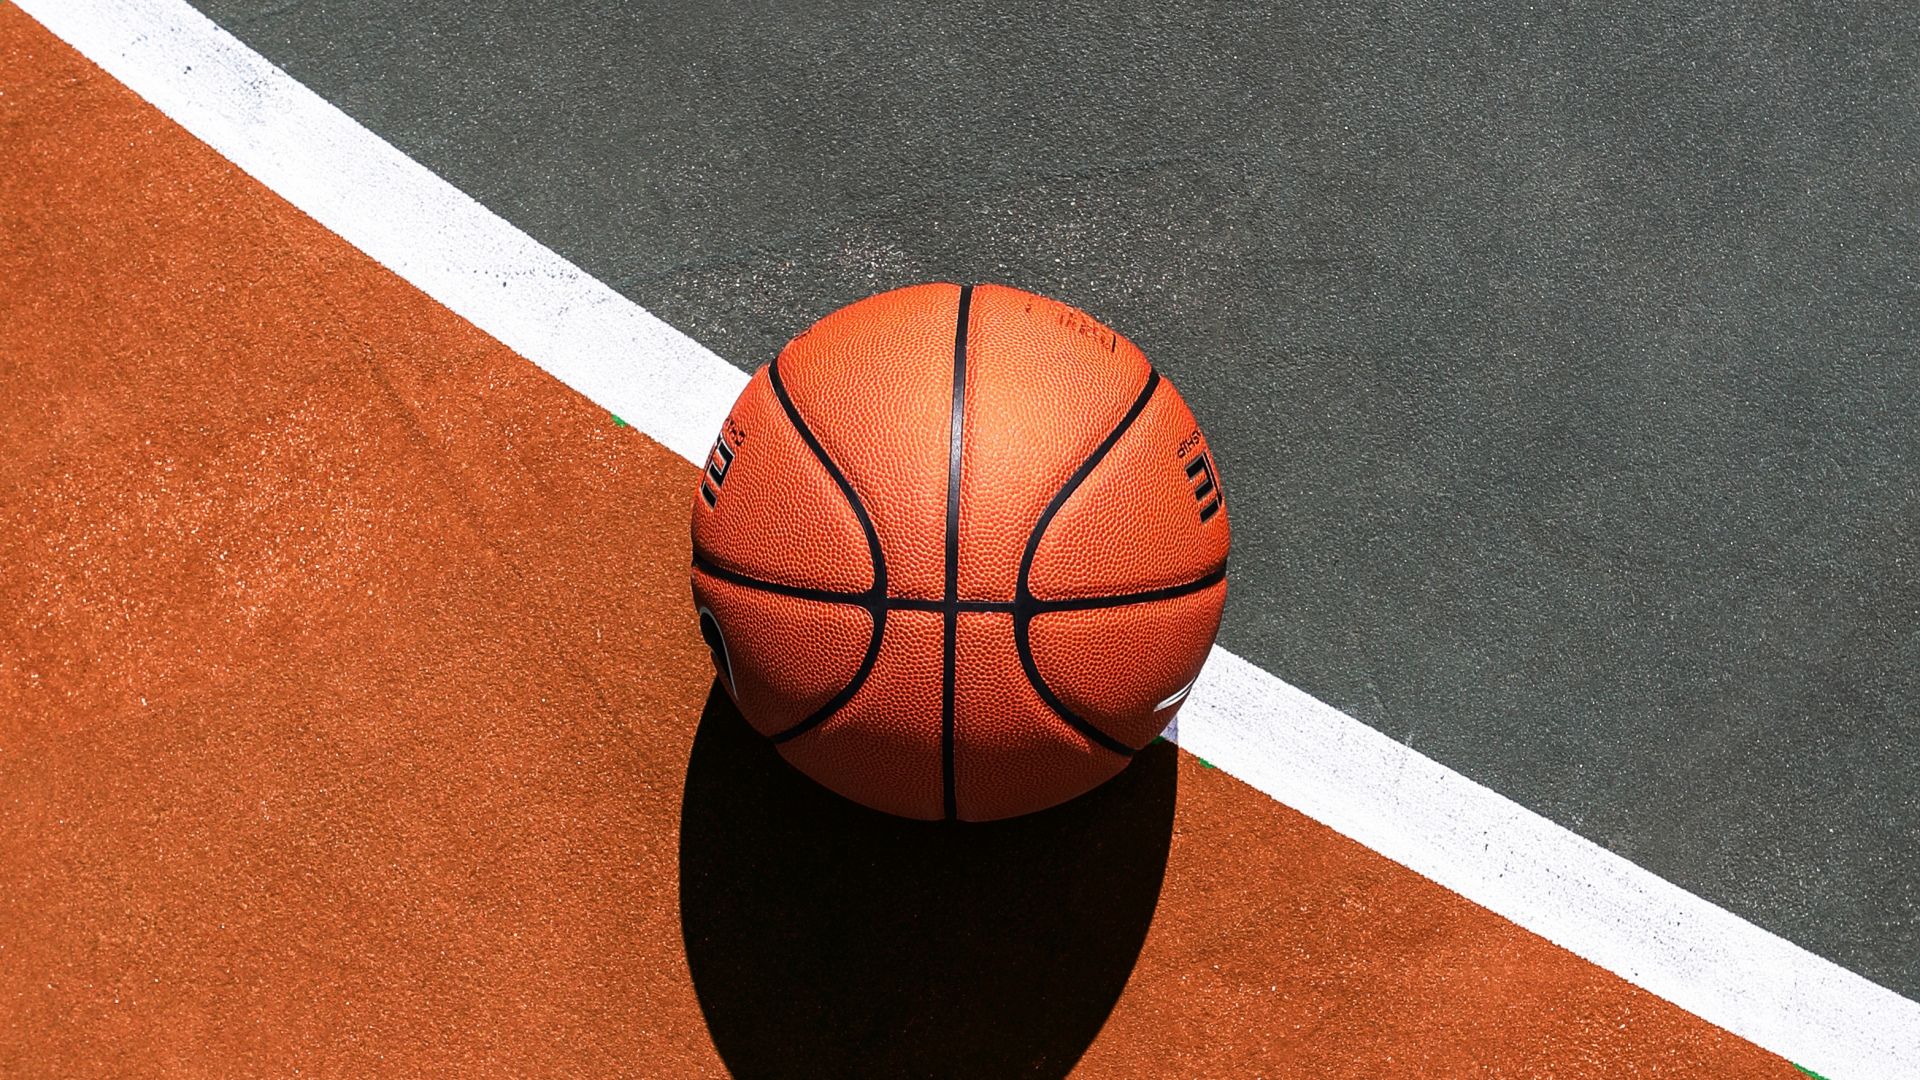 20 Selected 4k desktop wallpaper basketball You Can Save It For Free ...